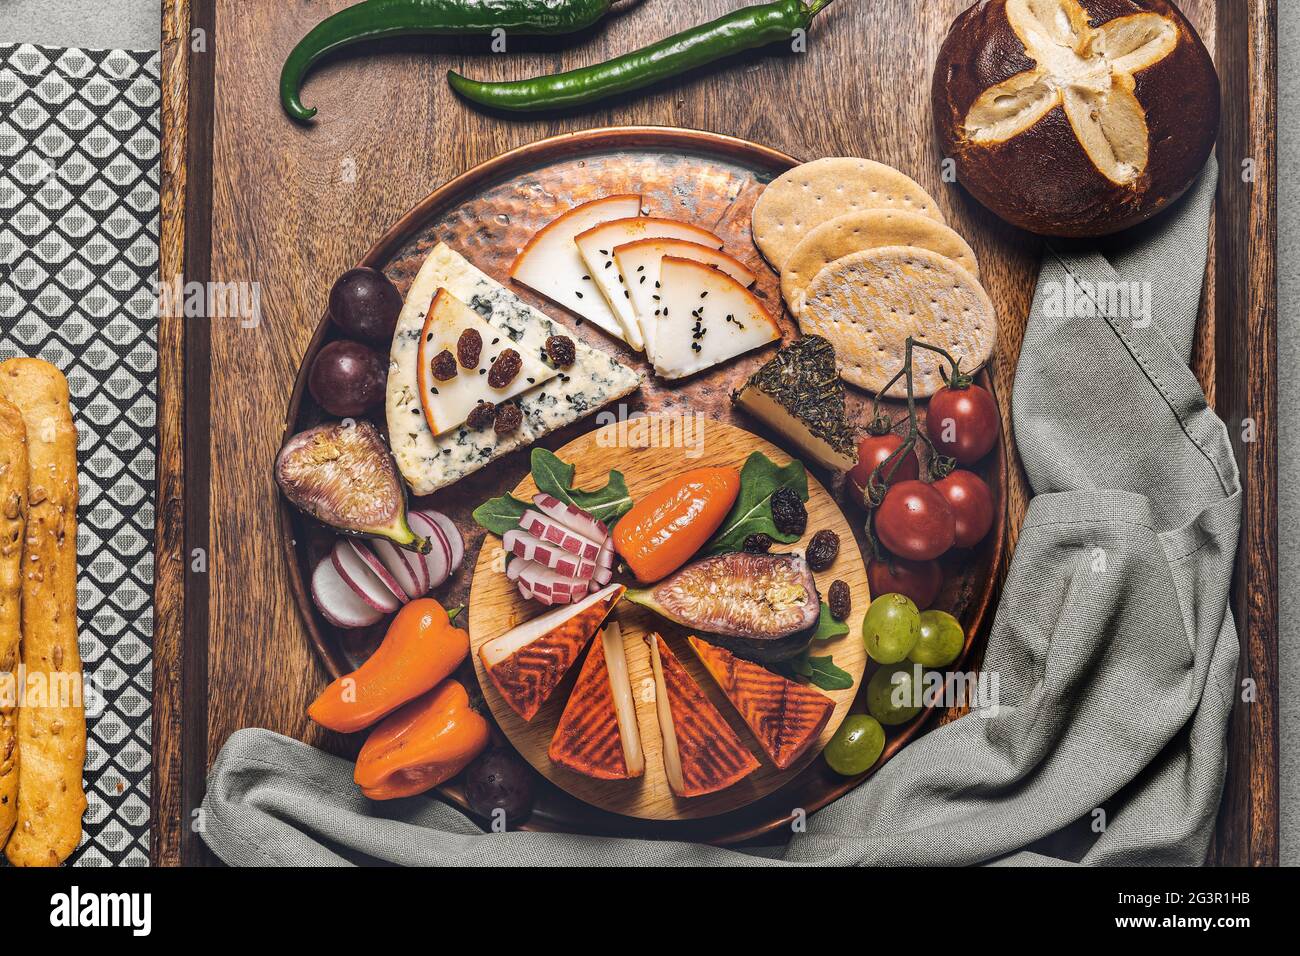 Food photography of cheese board with olives, crackers, cherry tomatoes, asparagus and peppers stuffed with cream cheese on a wooden tray. Mediterrane Stock Photo